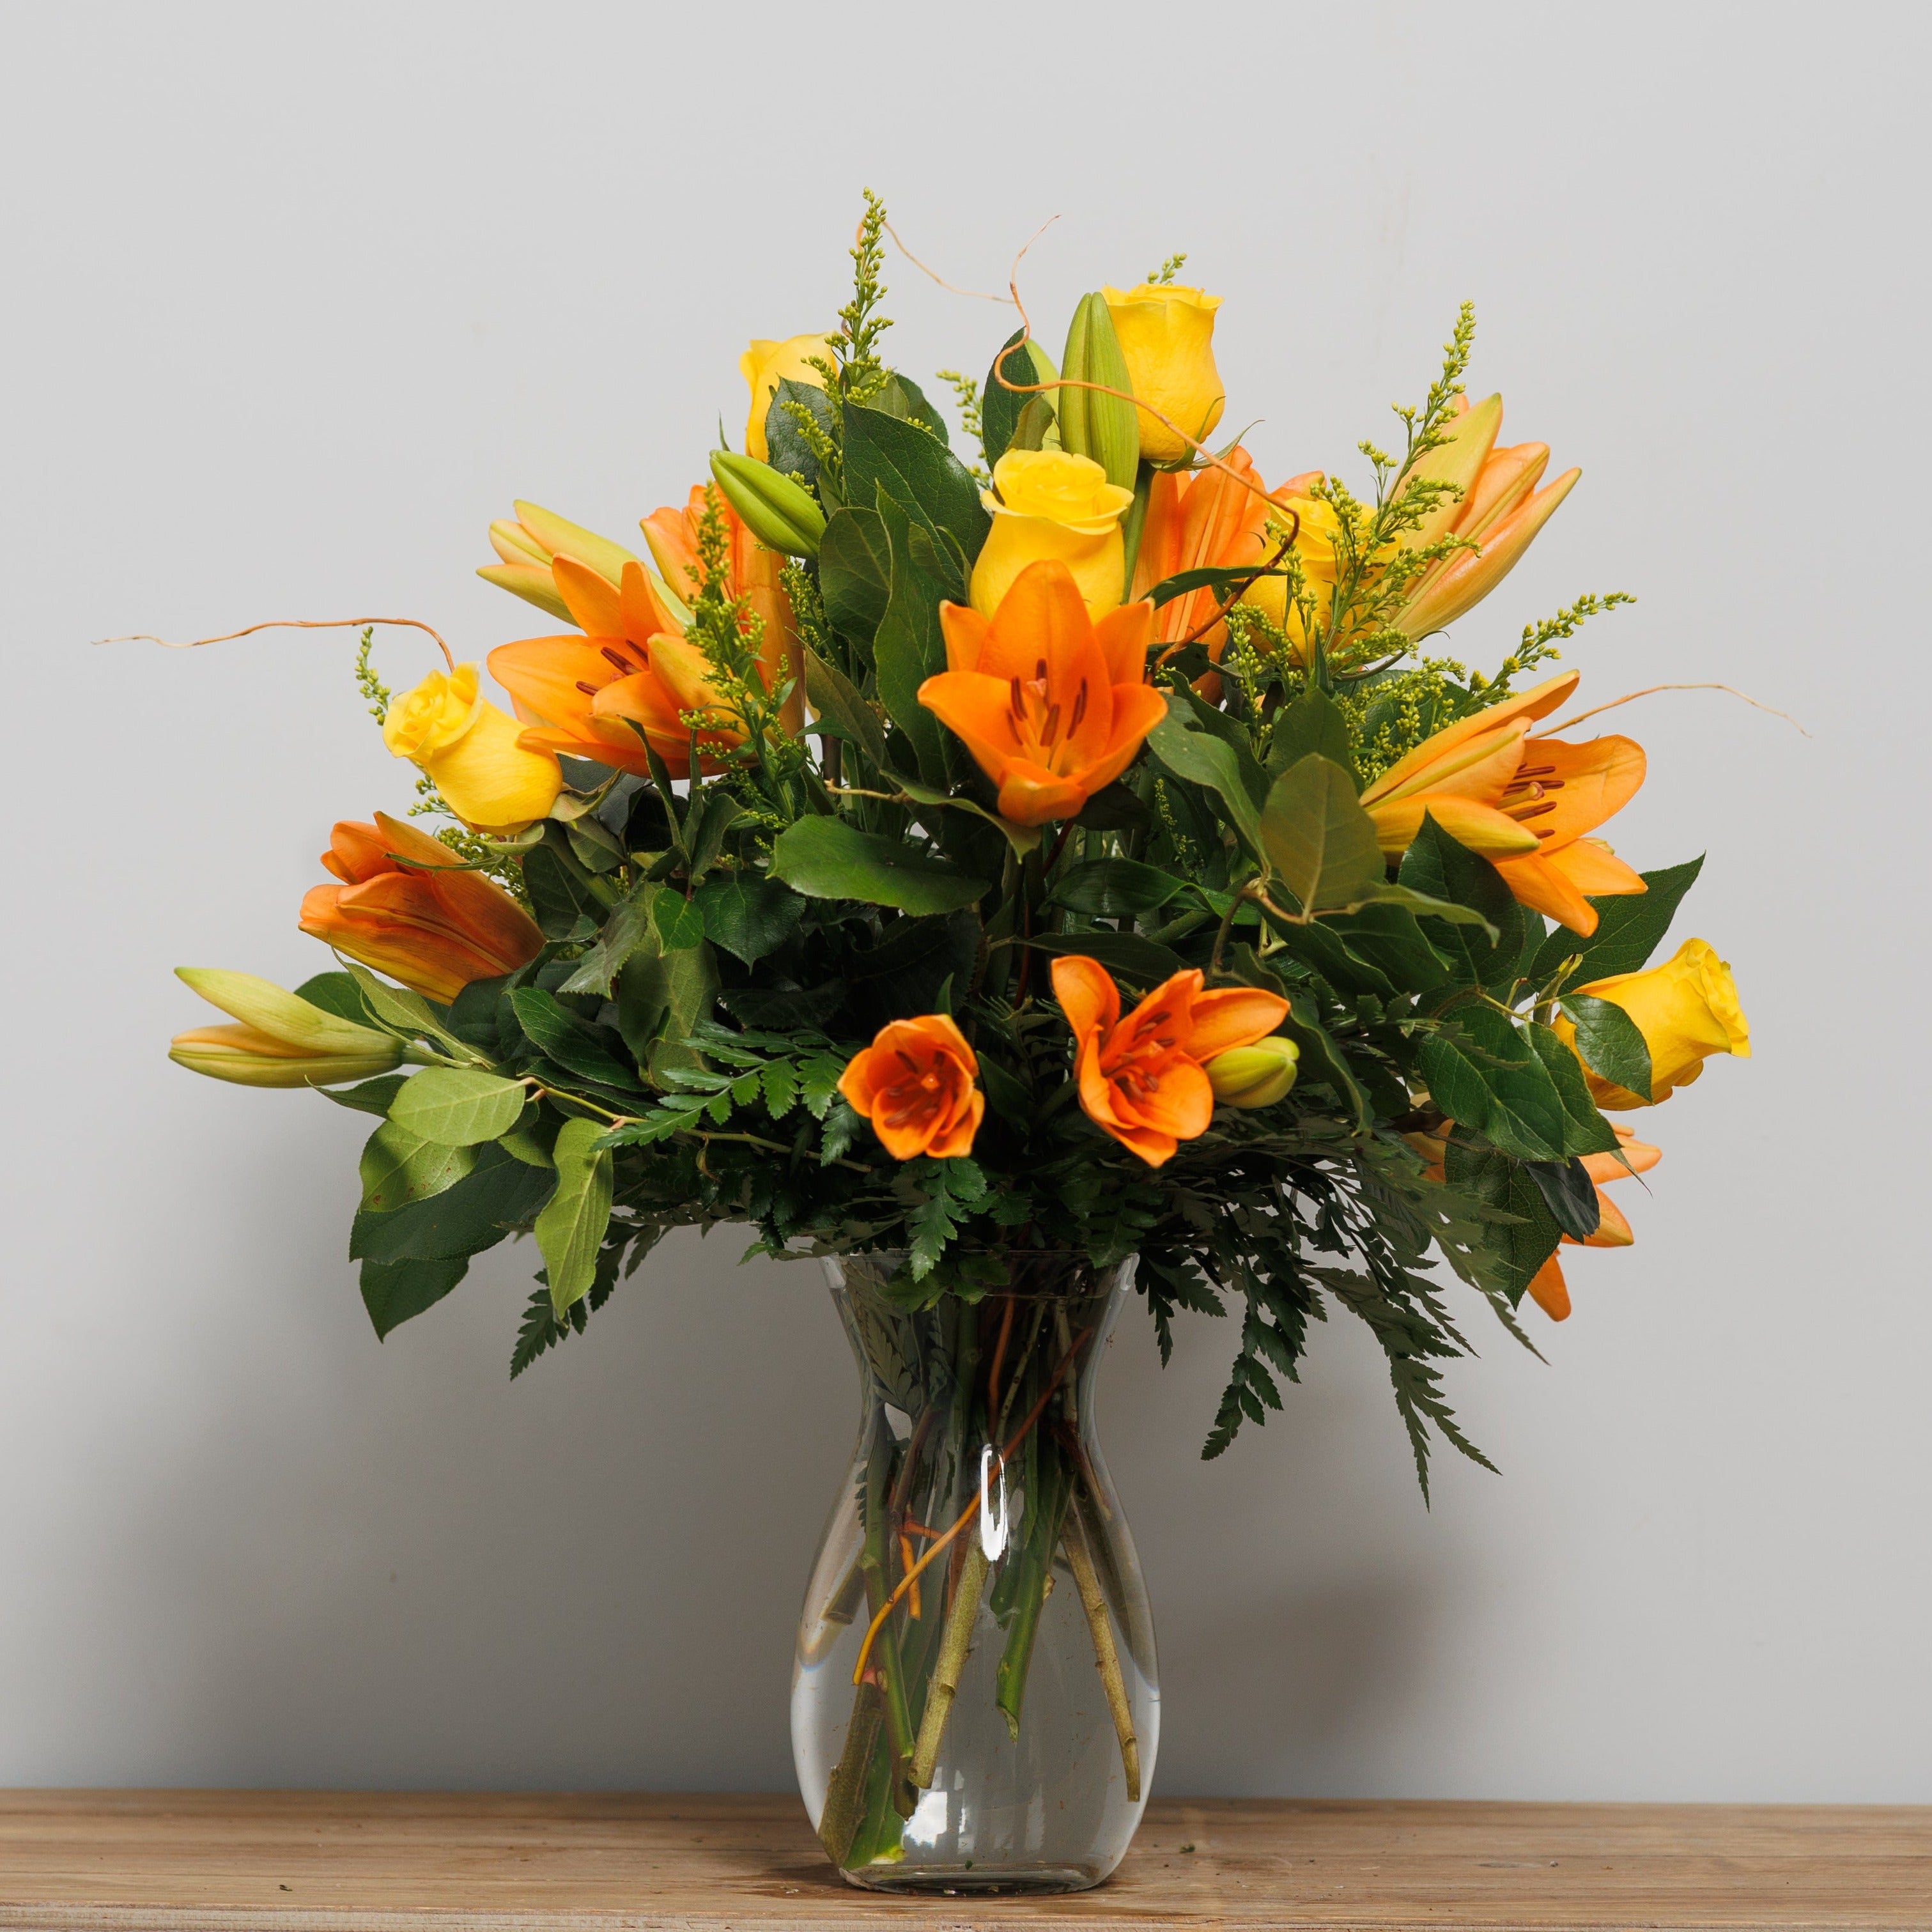 A vase arrangement with orange lilies and yellow roses.